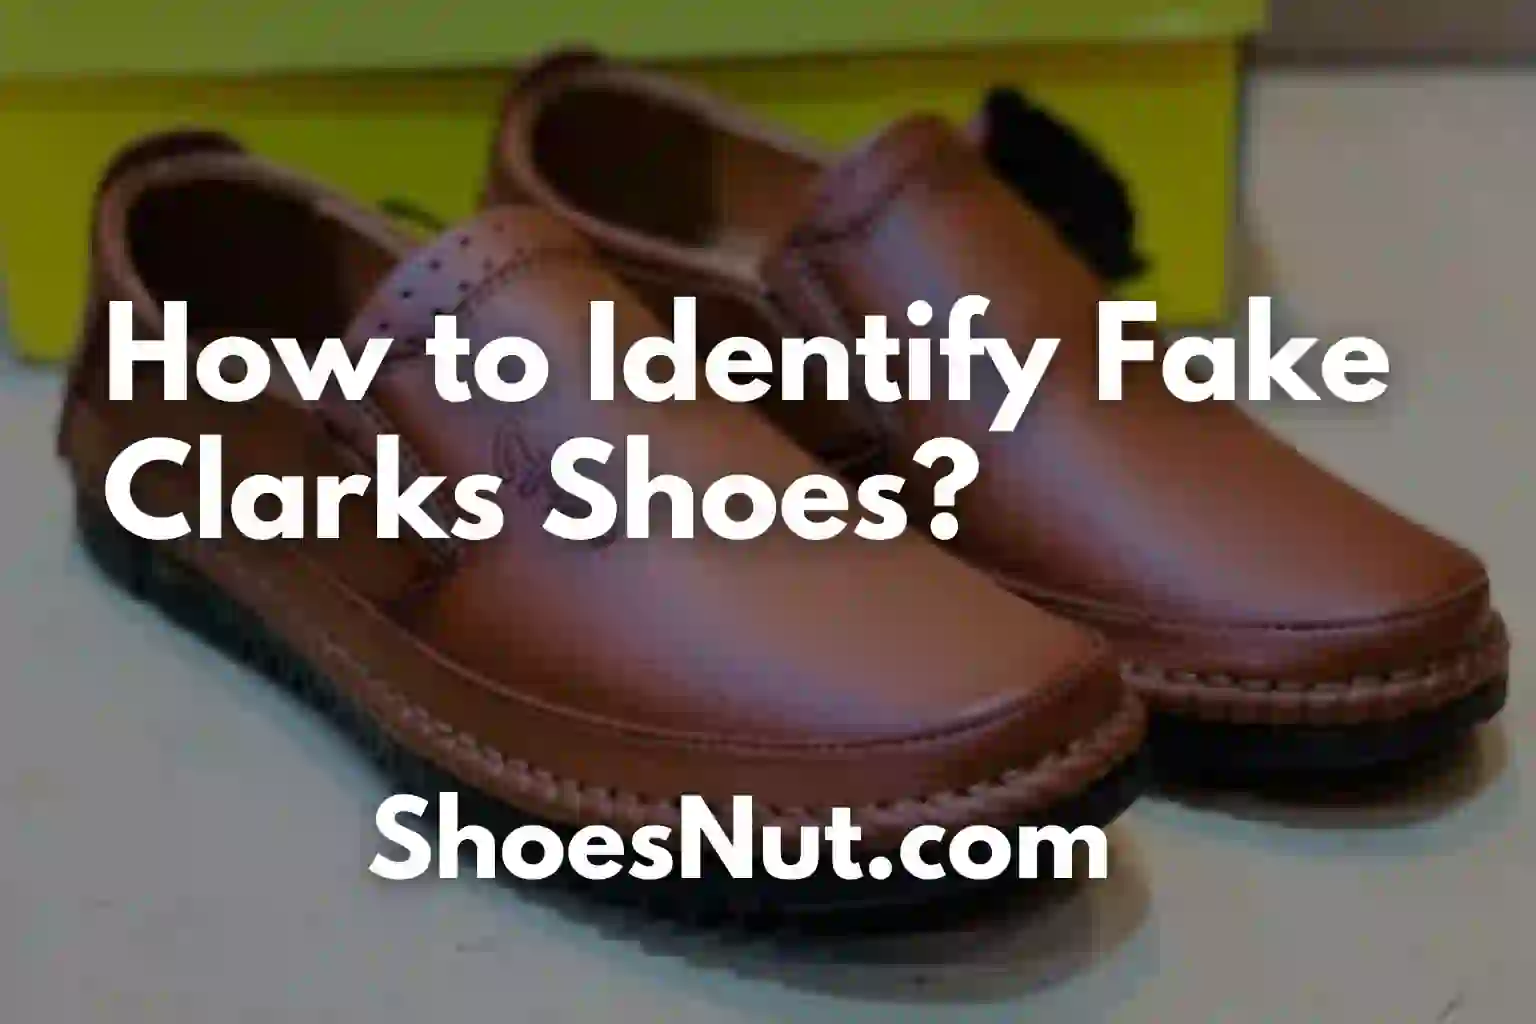 How to Identify Fake Clarks Shoes